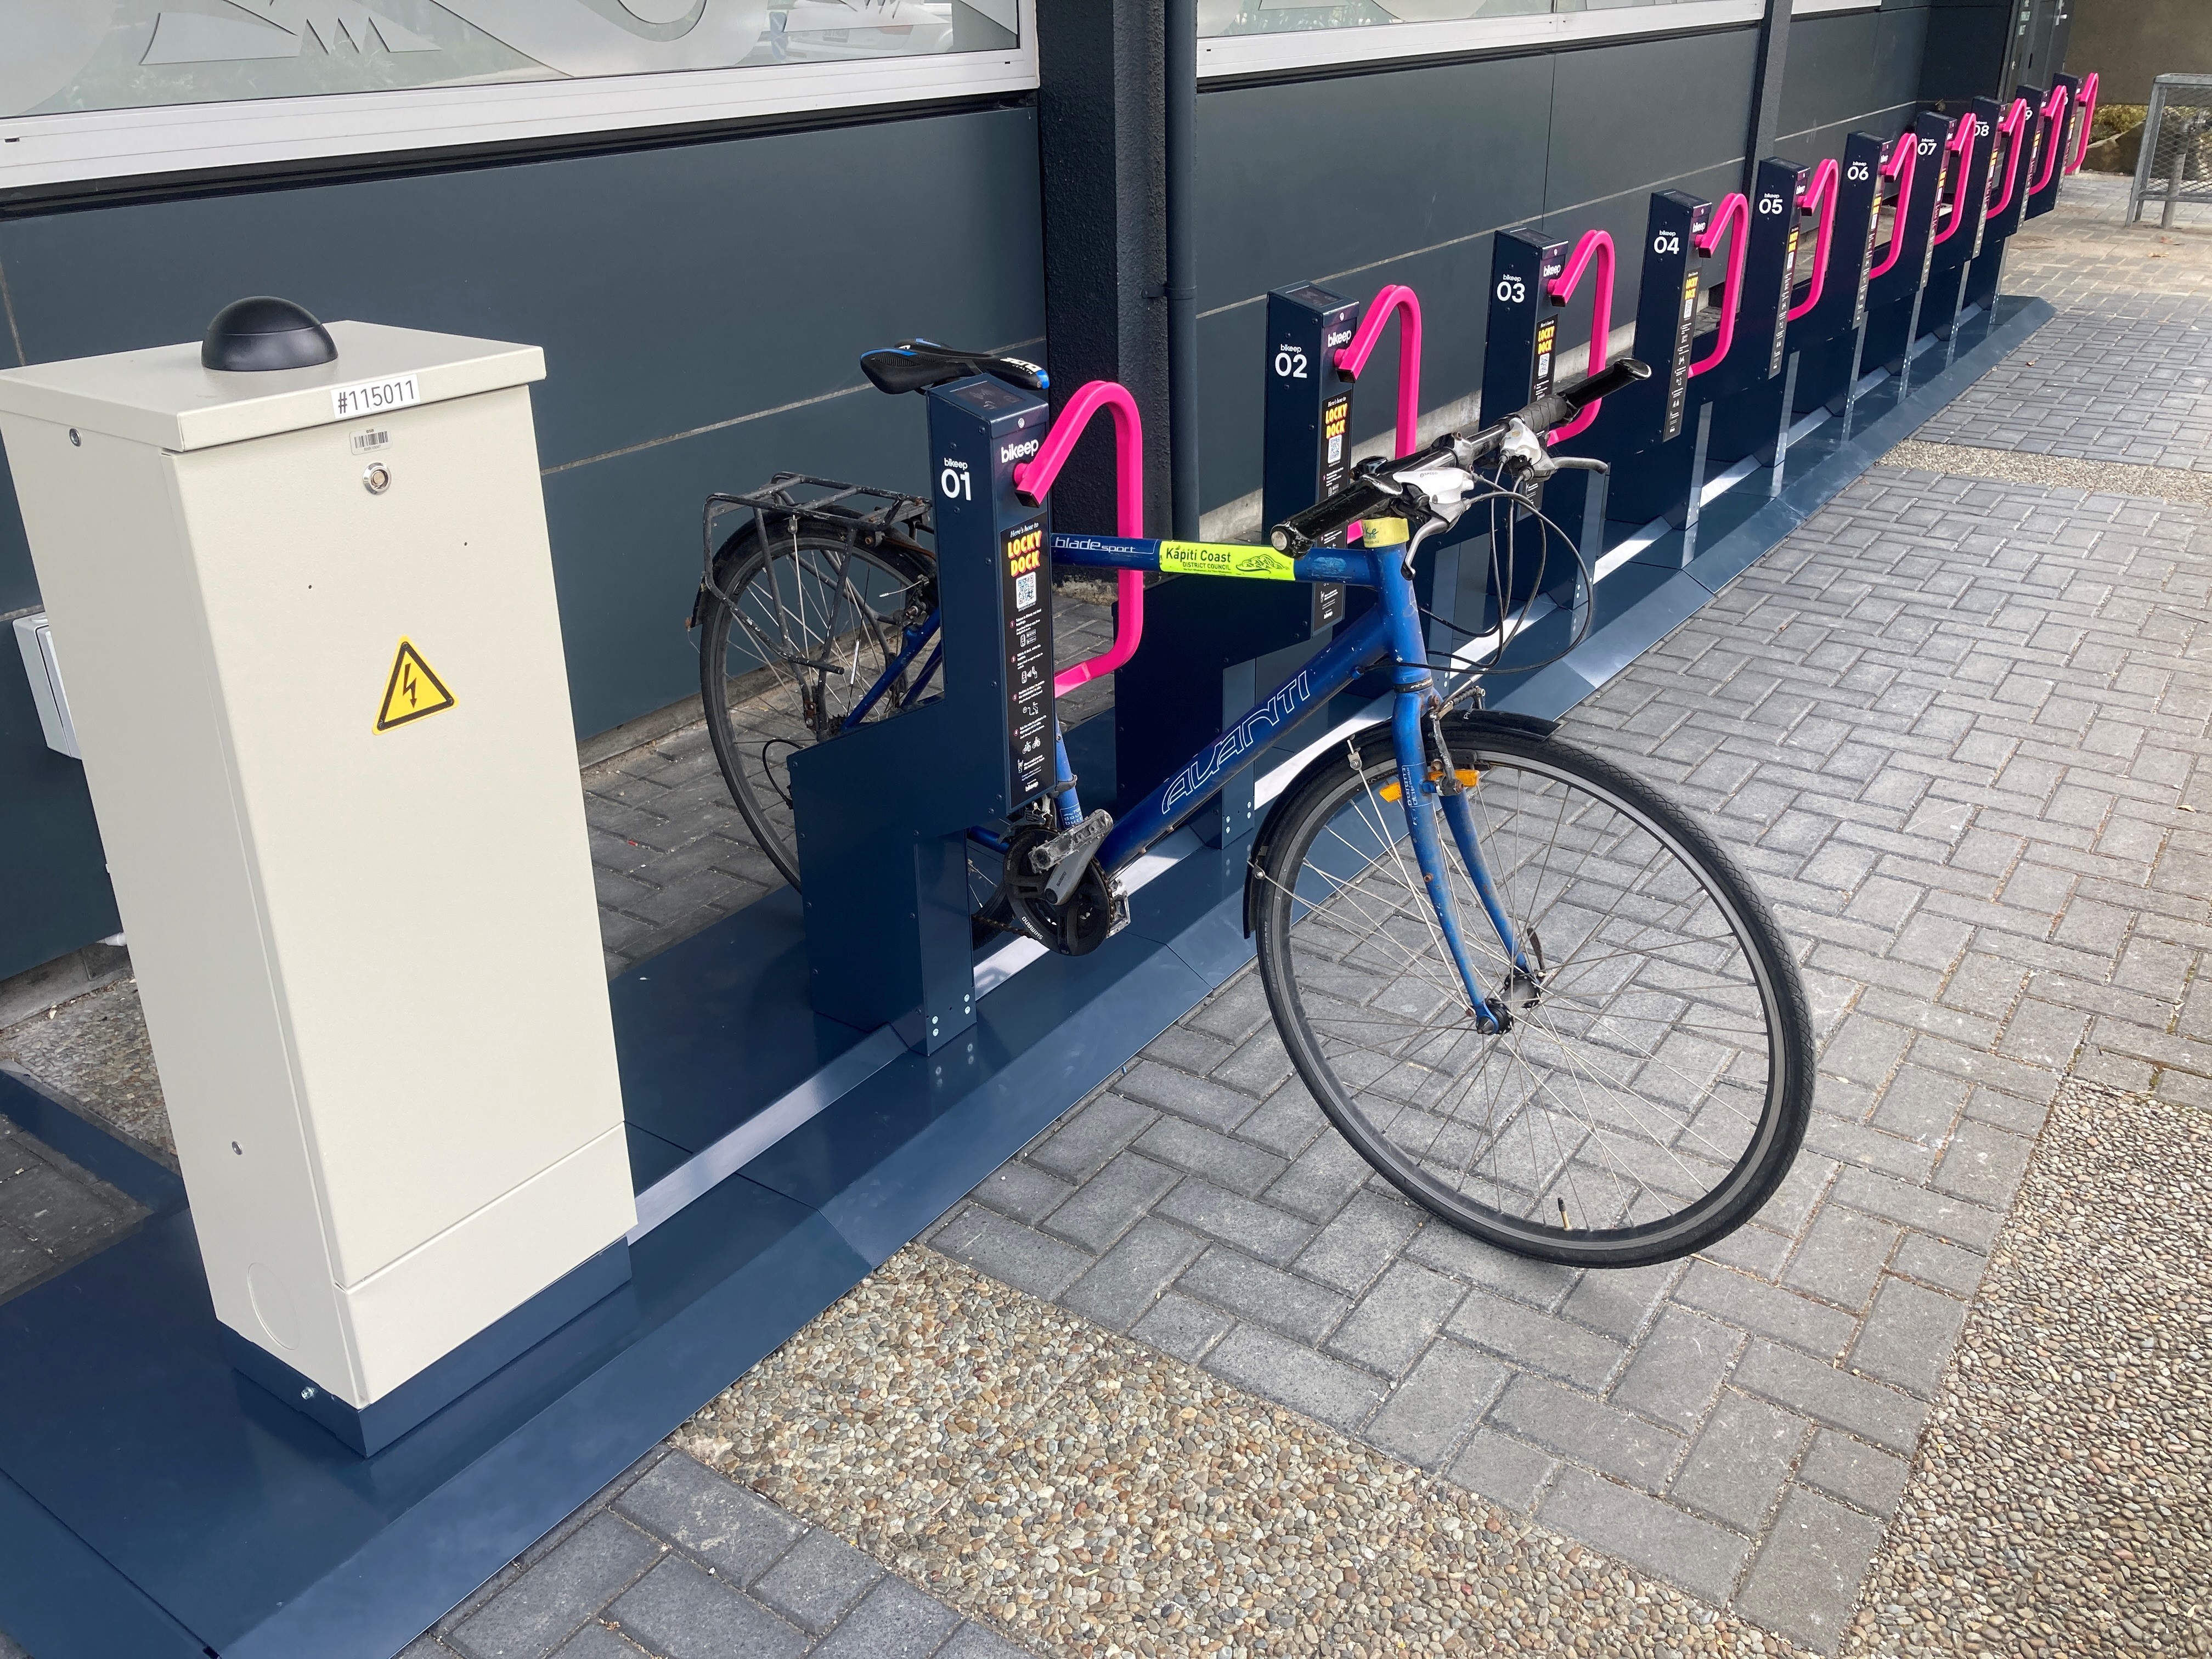 Photo of the locky dock bike stand outside Council offices in Rimu Road, with one bike secured.